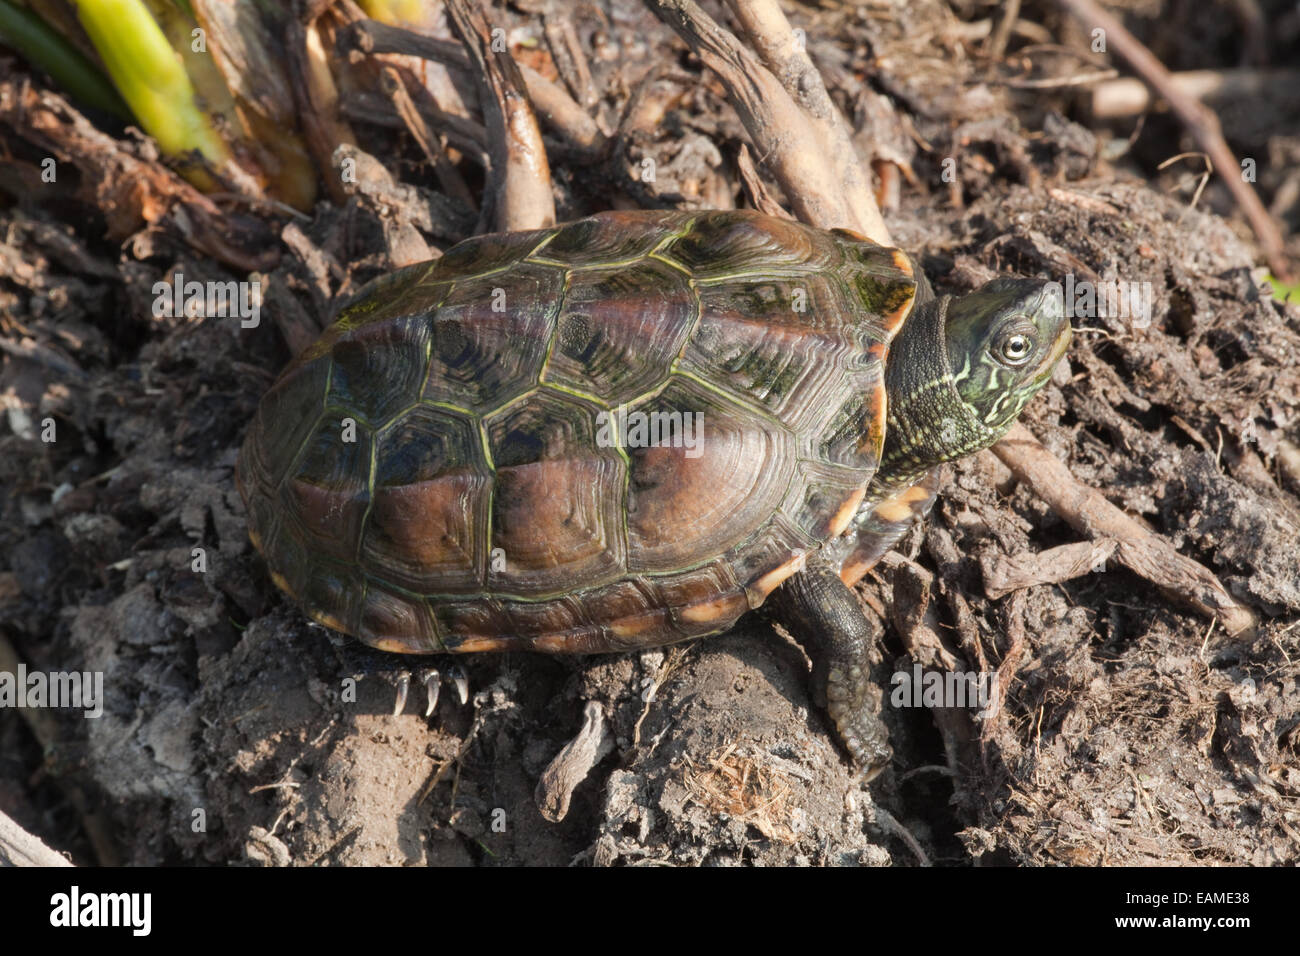 Chinese Pond, Three-keeled Pond, or Reeve's Turtle.  Mauremys (Chinemys) reevesii.  Threatened/Endangered species native Chinina Stock Photo